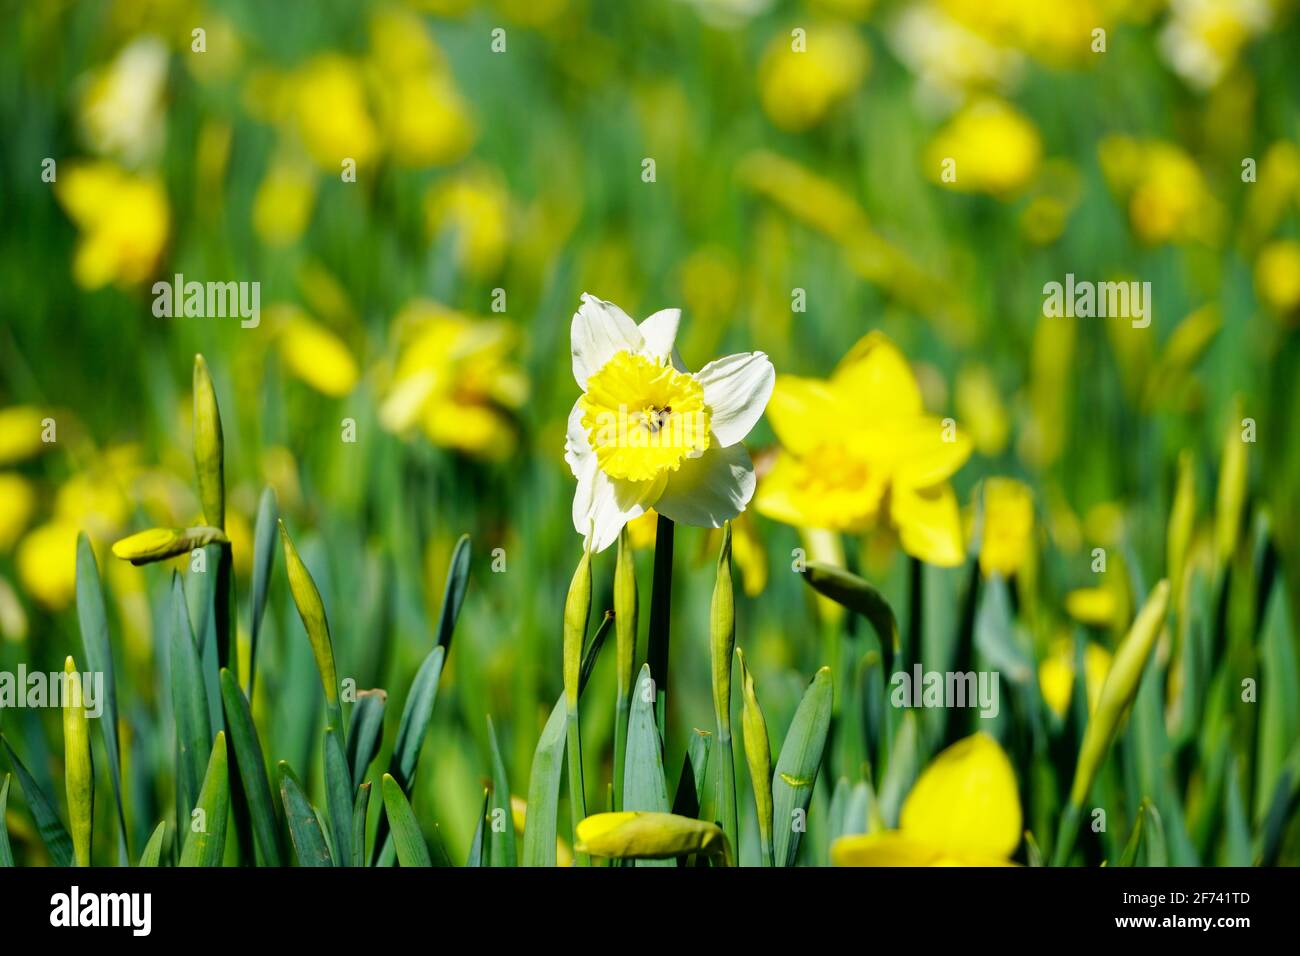 A field of yellow daffodils. Blooming spring flowers in the garden. Stock Photo